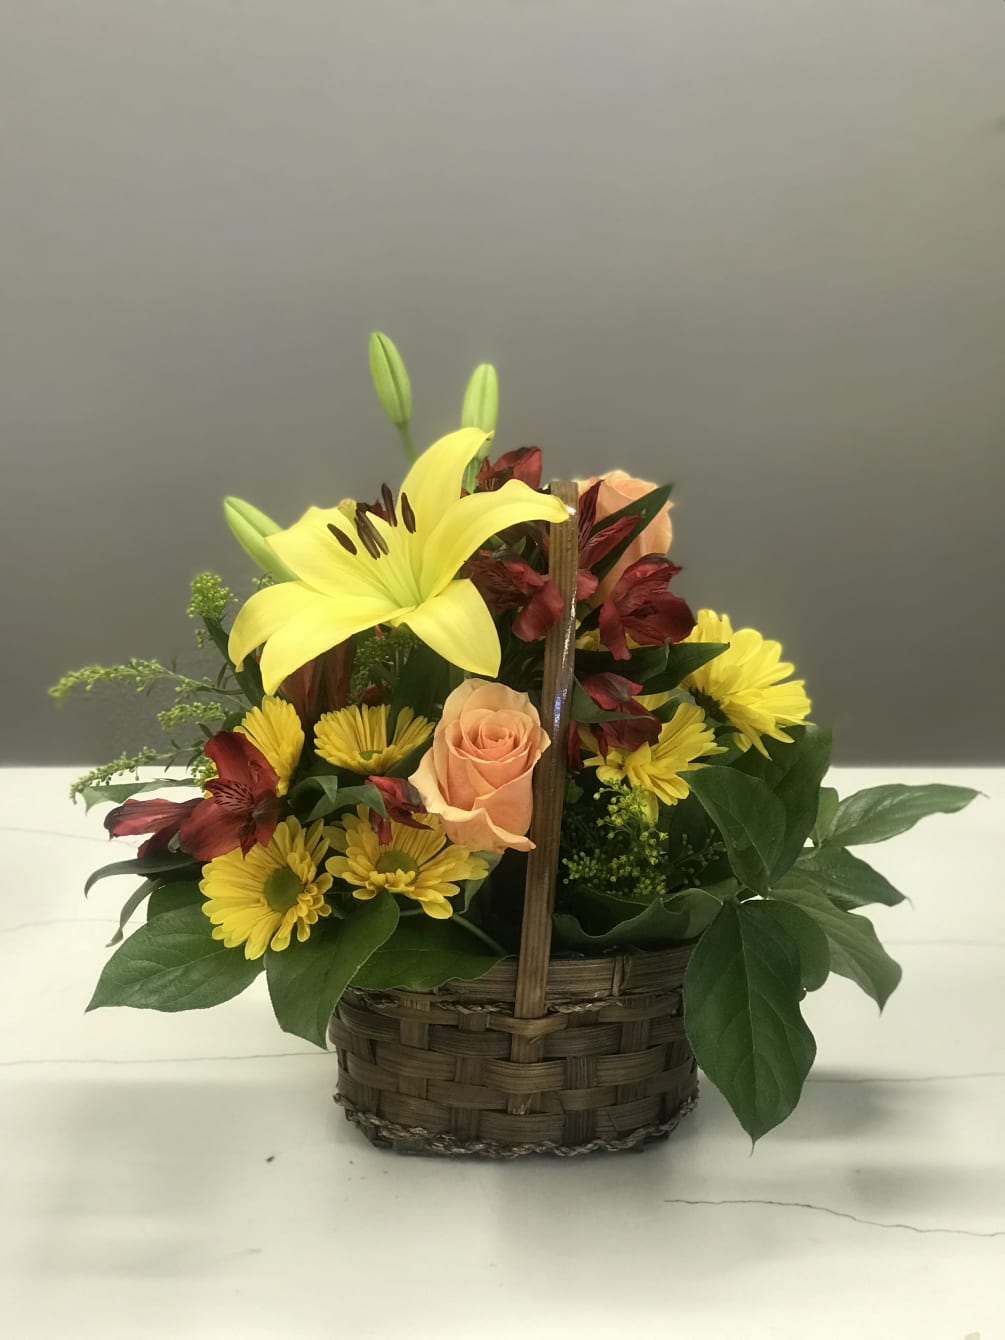 Full of autumnal colors, this little basket is the perfect gift to